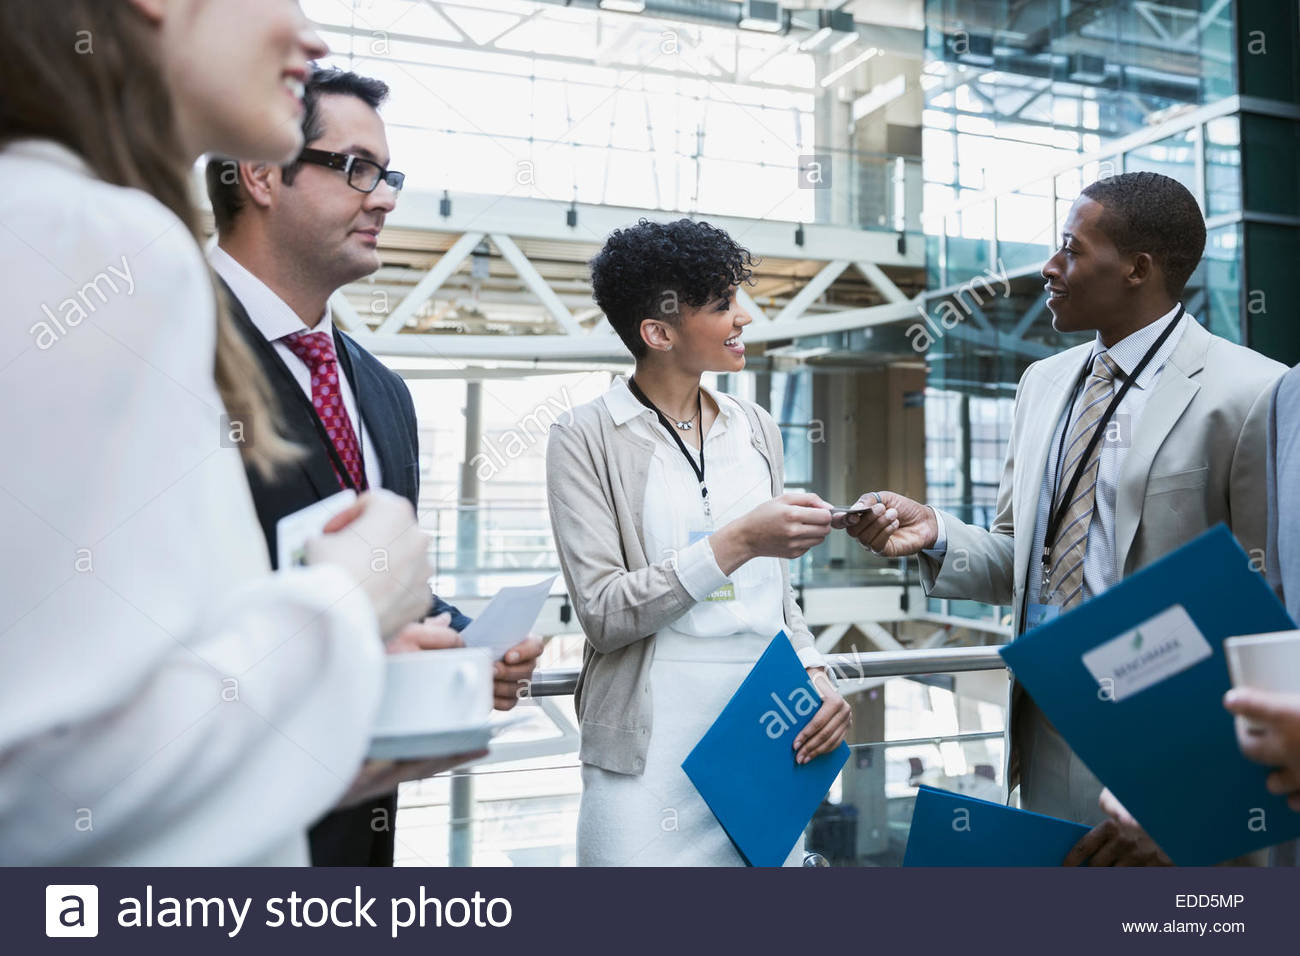 Business people networking at conference Stock Photo